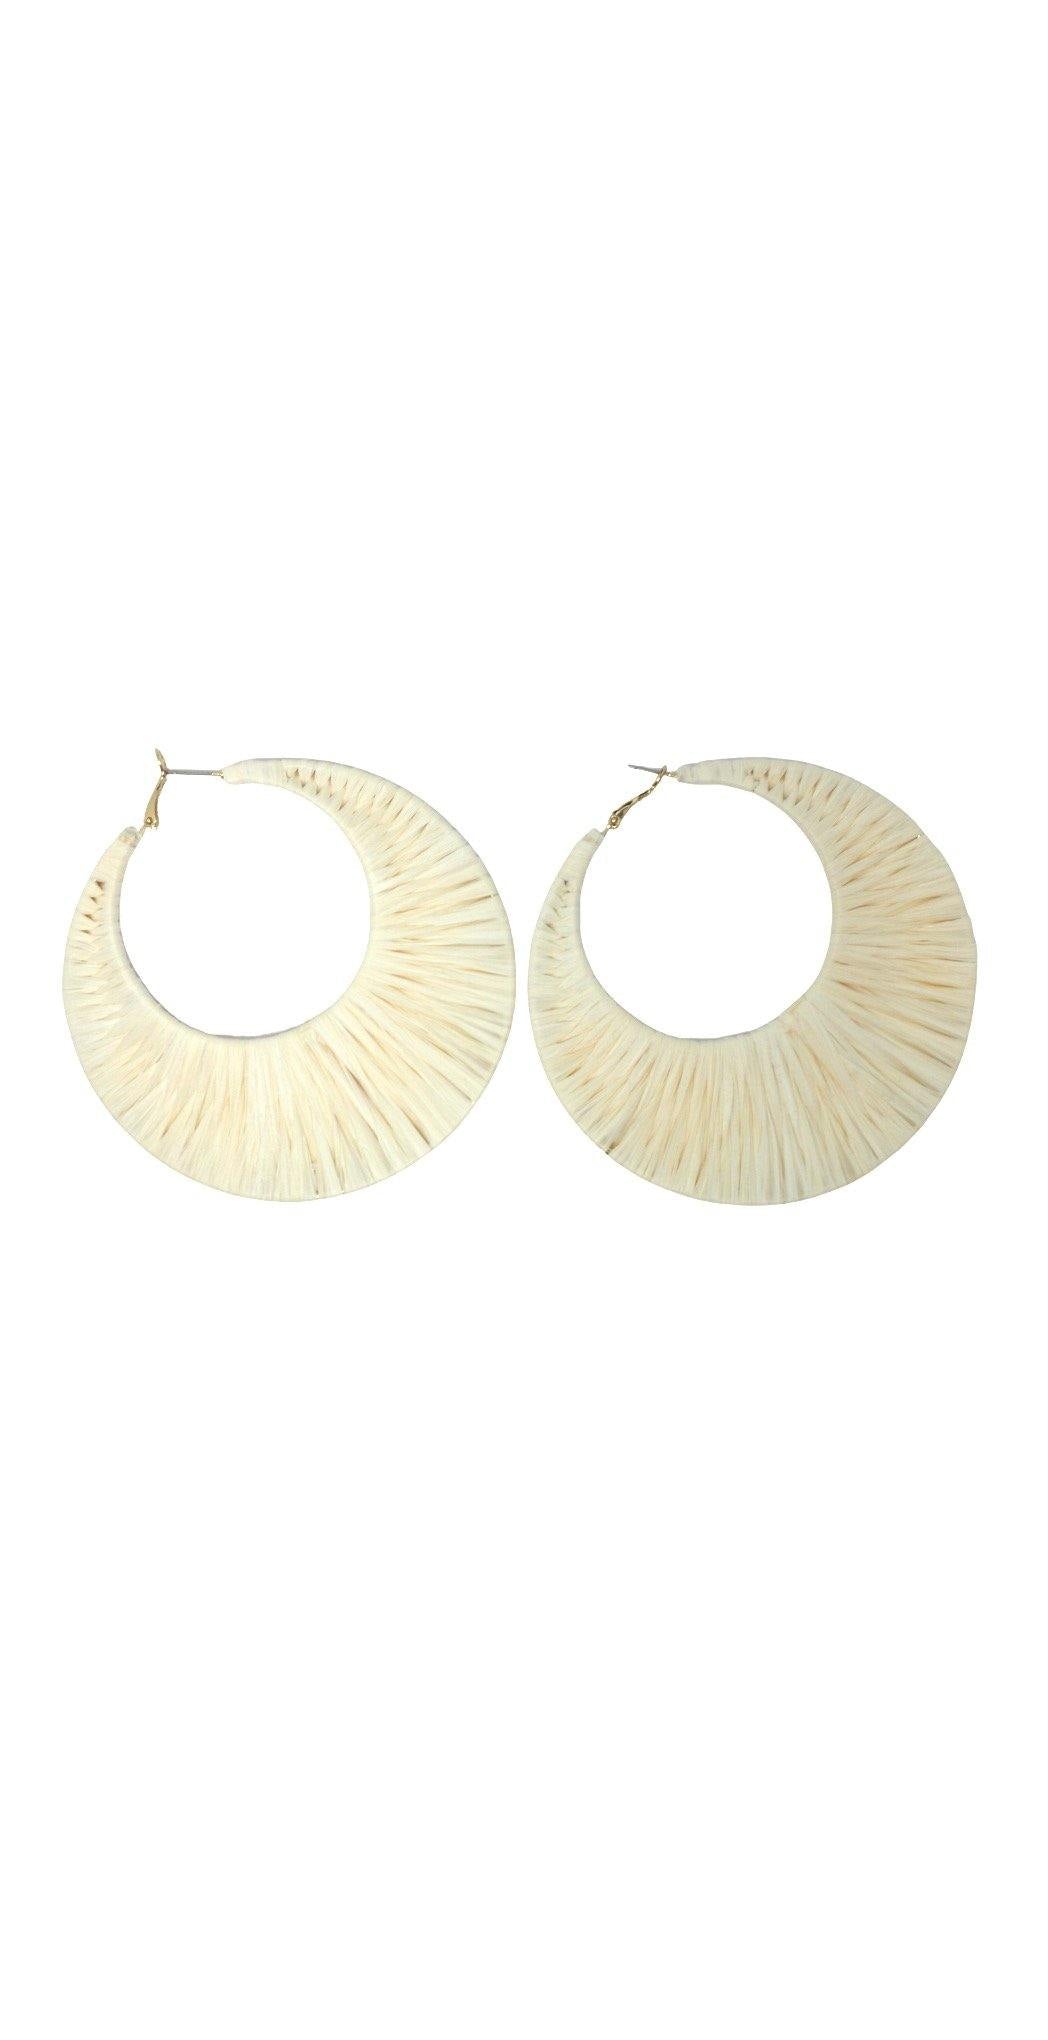 Large Ivory Circle Earrings - The Fashion Foundation - {{ discount designer}}